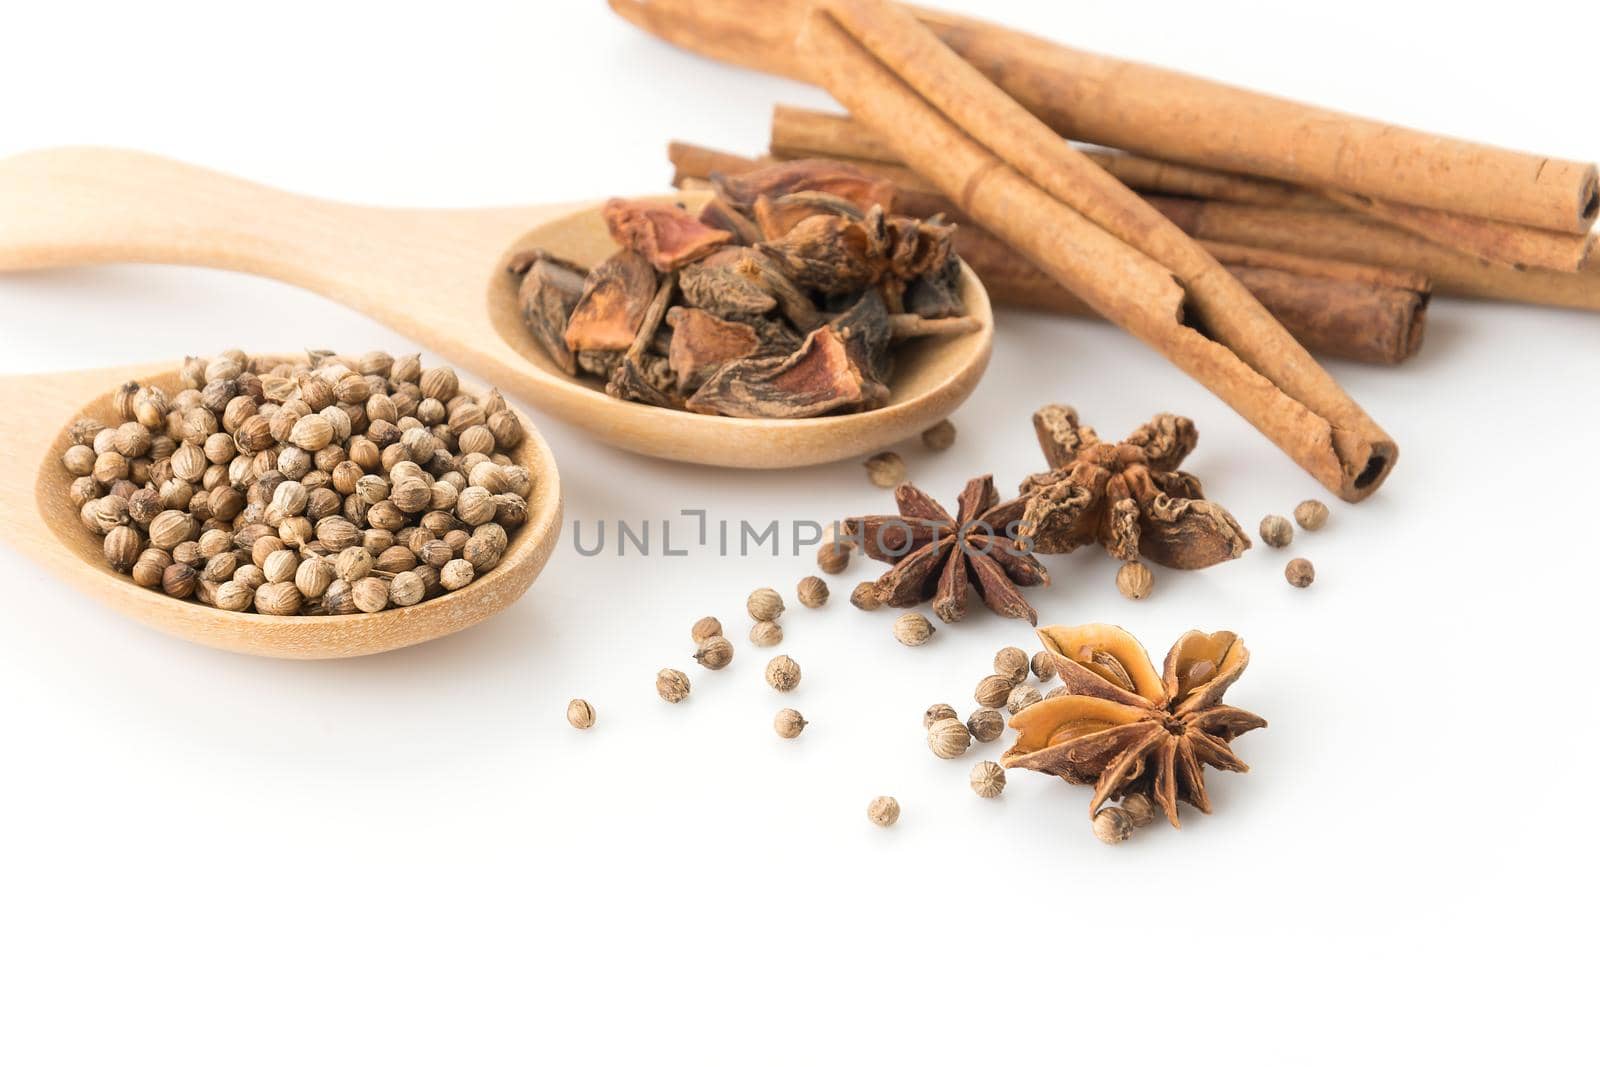 five-spice ingredient on white background